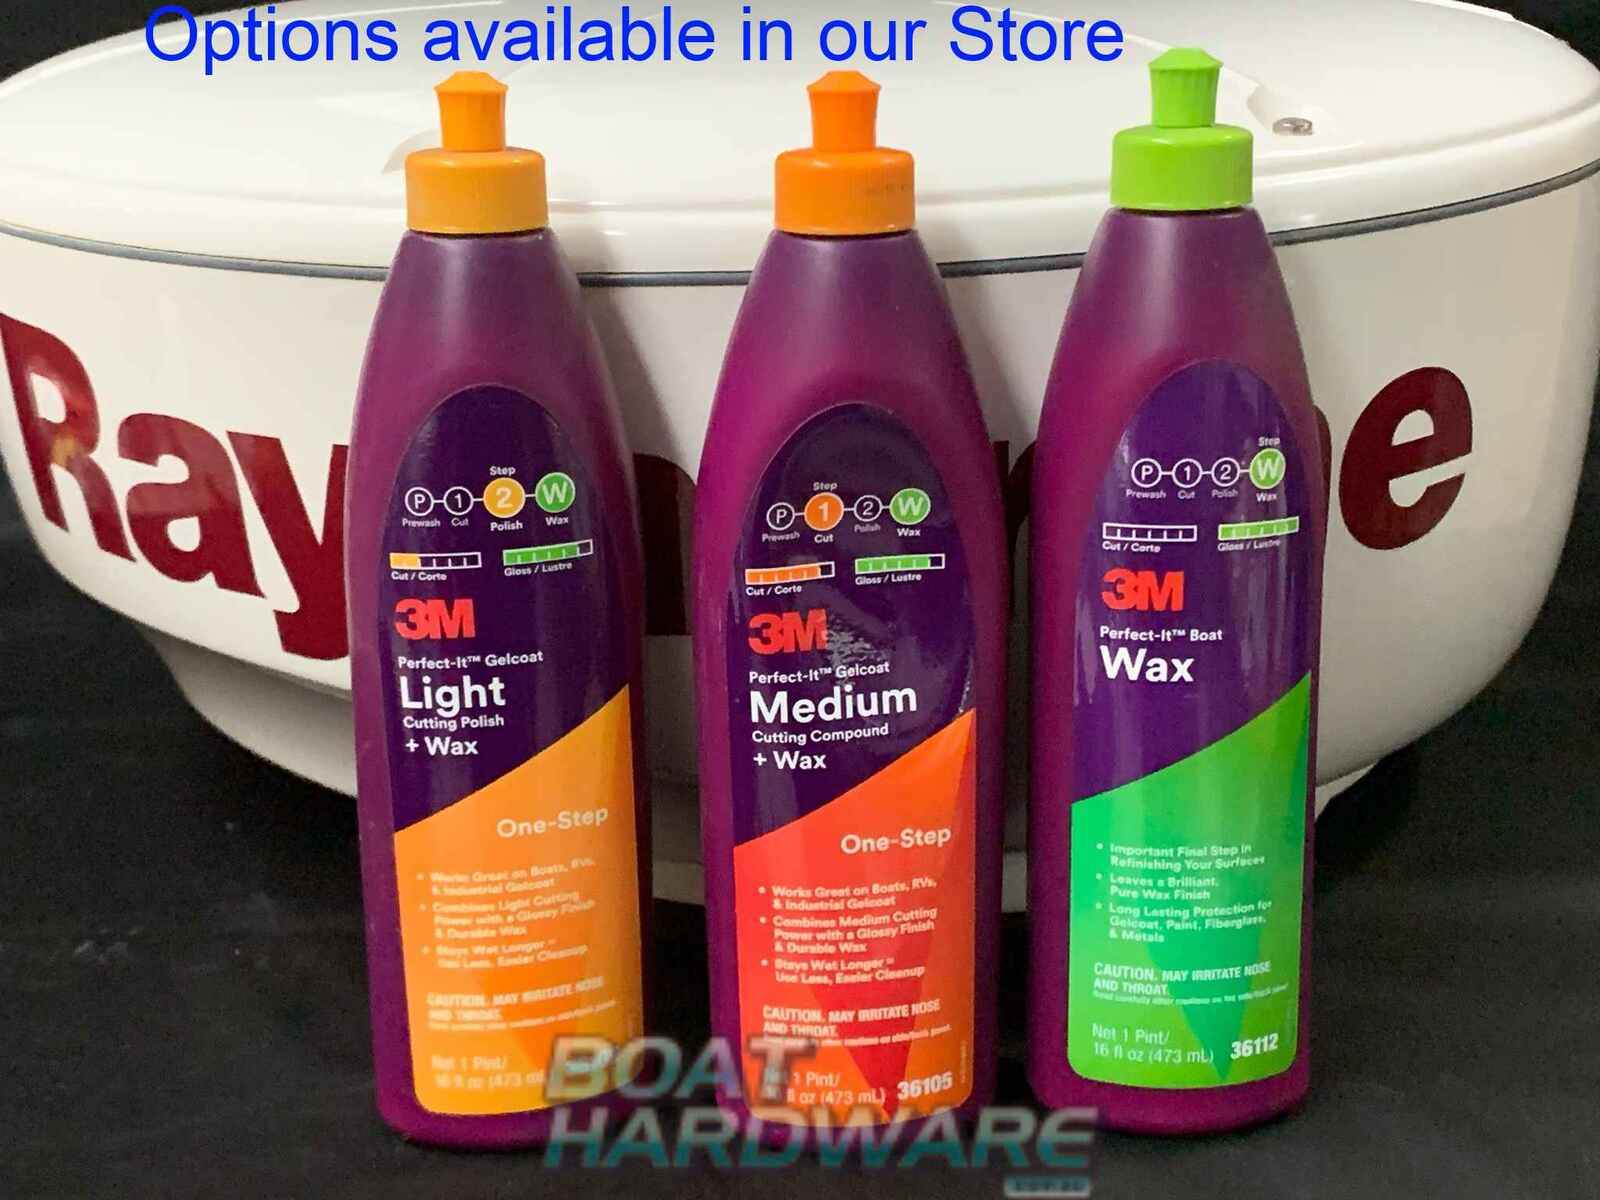  3M Perfect-It Boat Wax, 36112, 1 Pint, Contains Carnauba Wax,  Protects against Weather and Oxidation, For Boats and RVs : Automotive